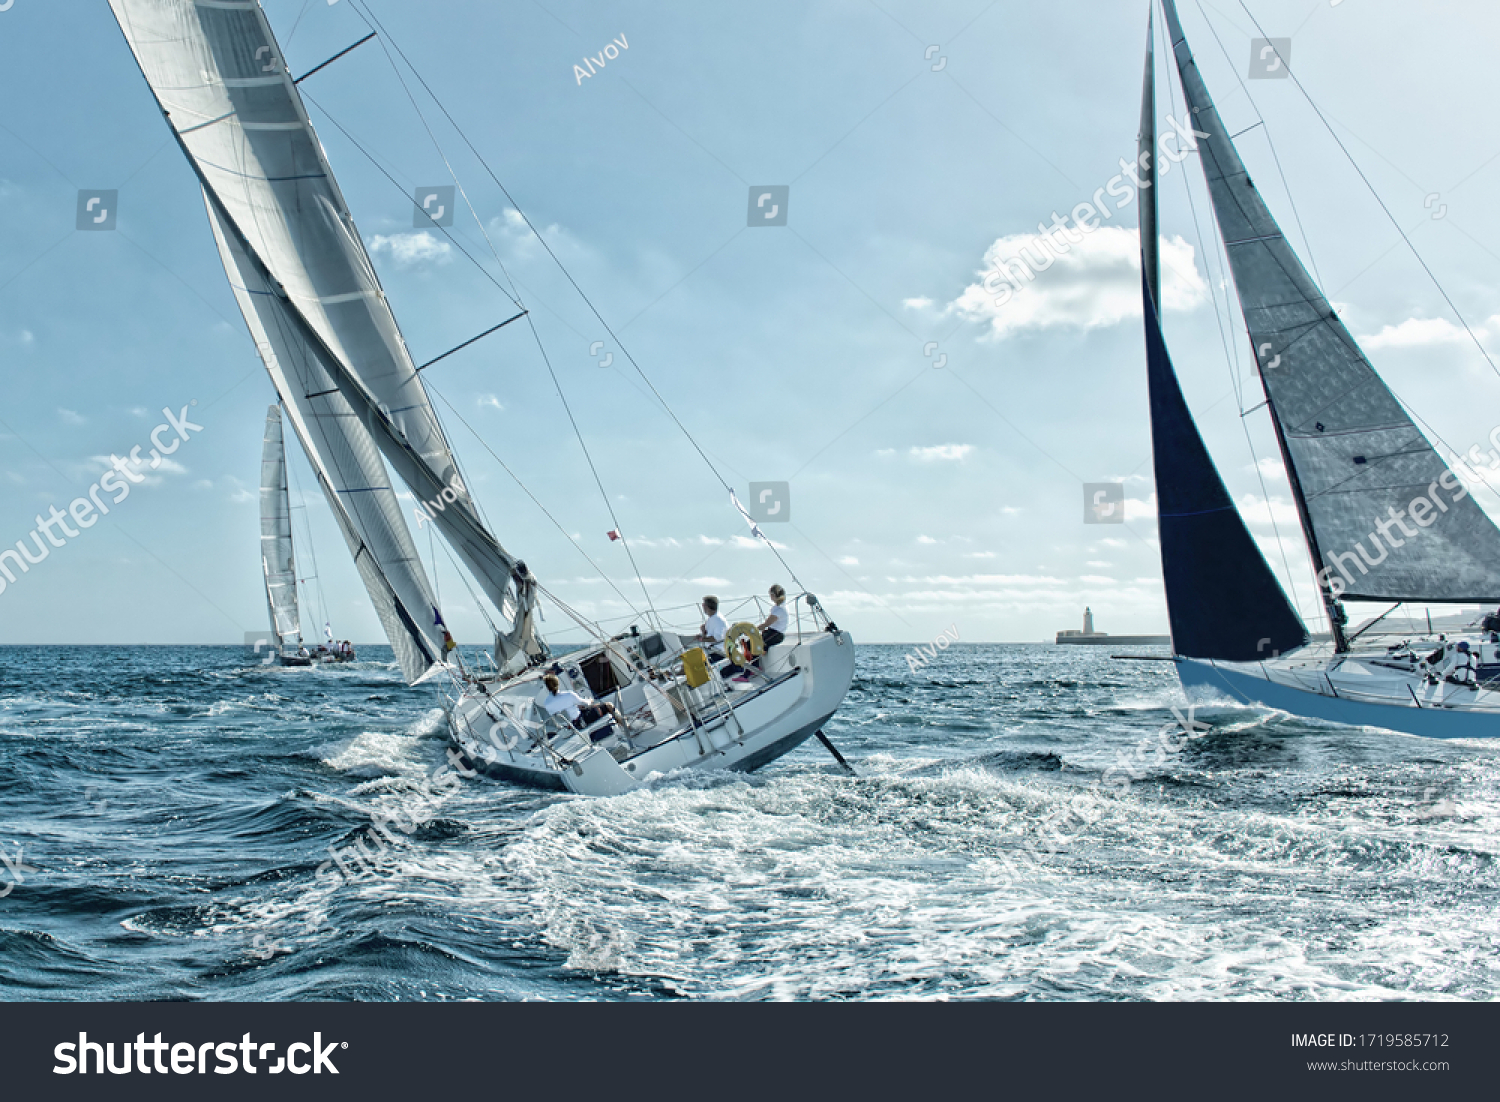 Race of sailing yachts. Sails in the sea. Yachting #1719585712